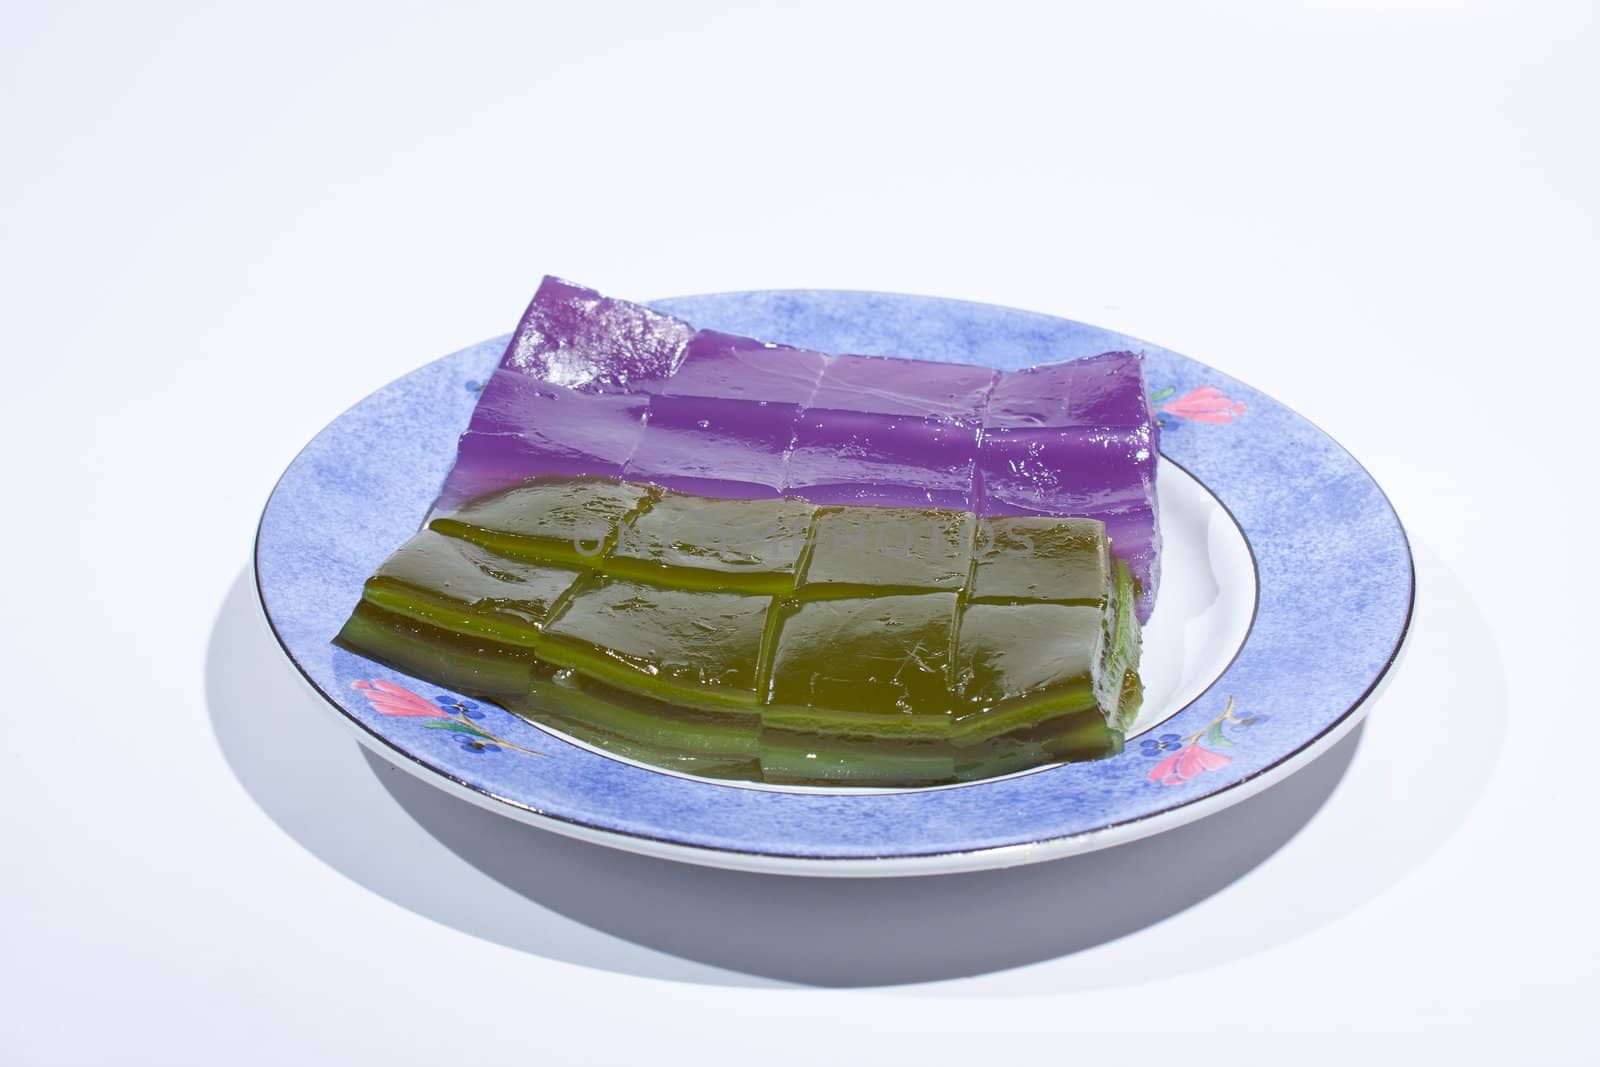 Thai dessert is a layered dessert that any soft clay layer palatable